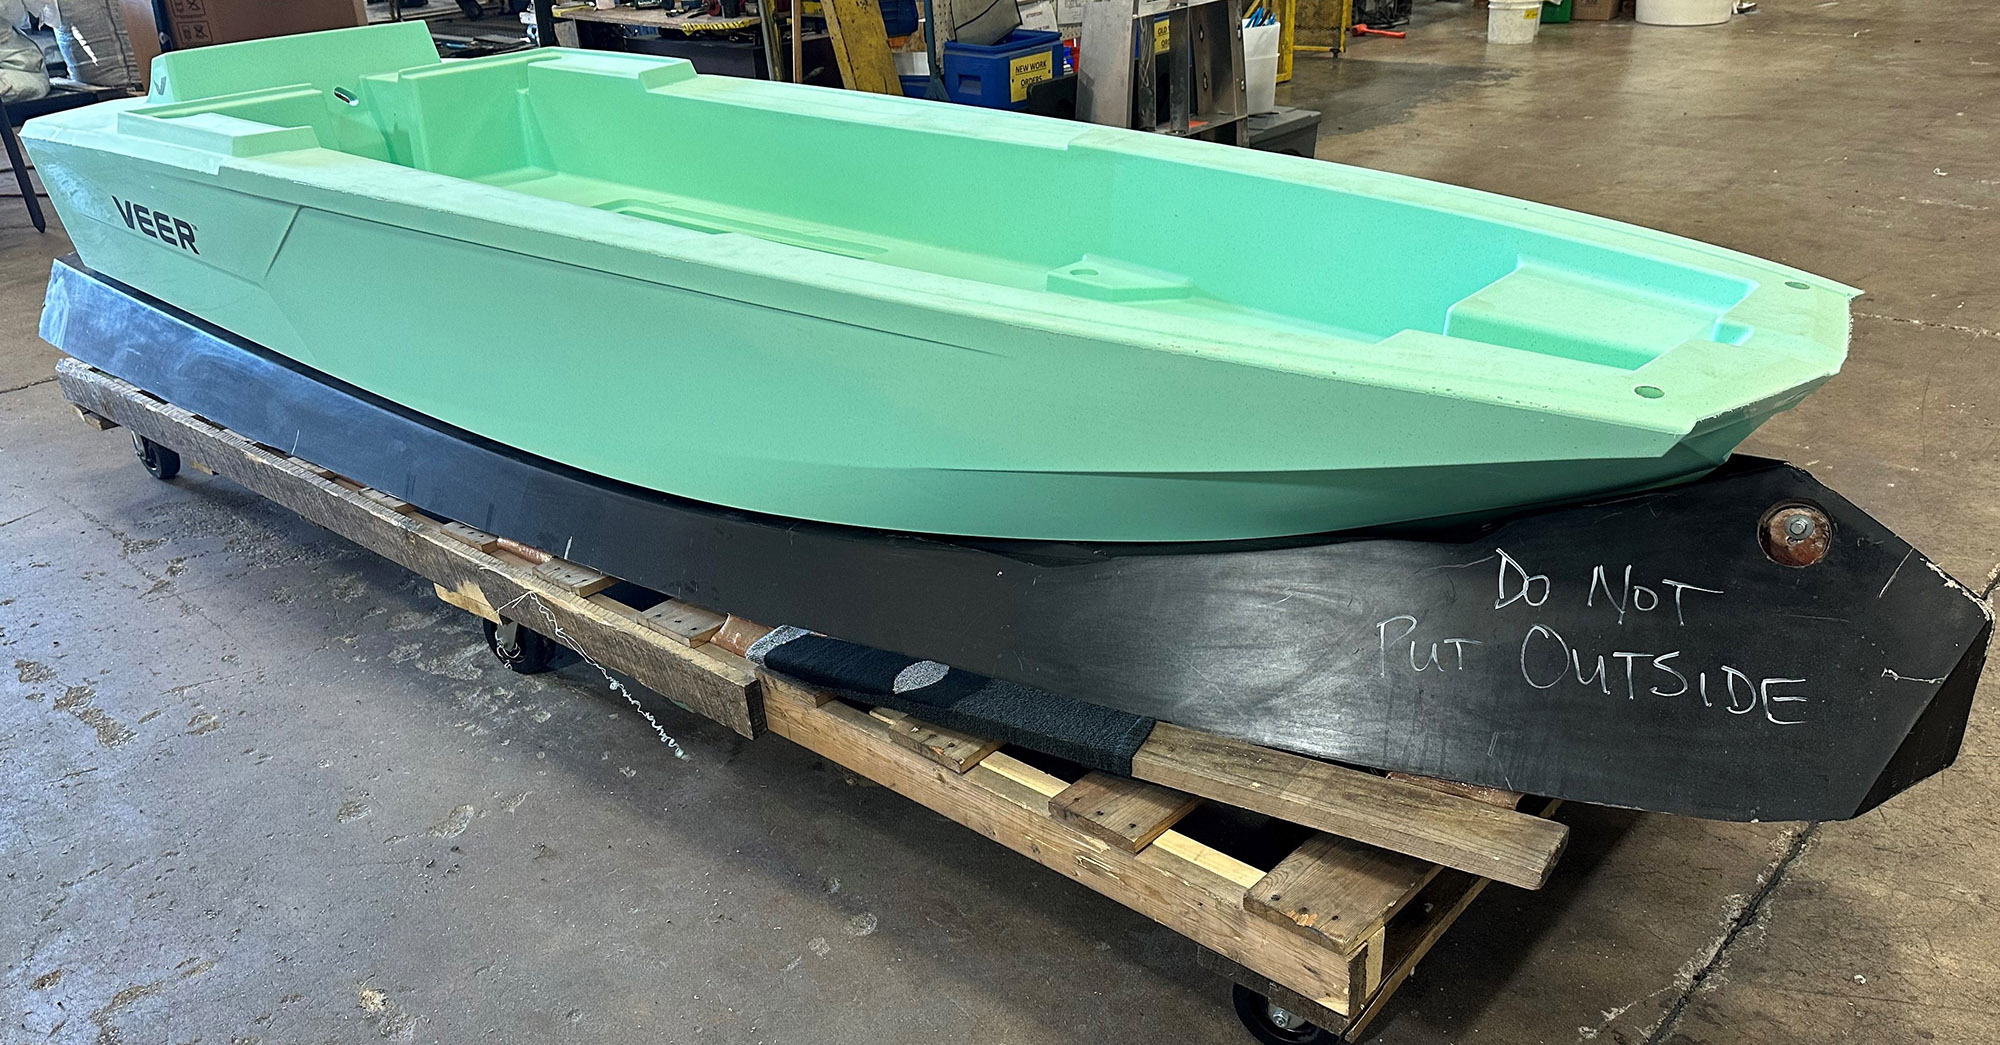 The Veer boat as it comes out of the mold. 